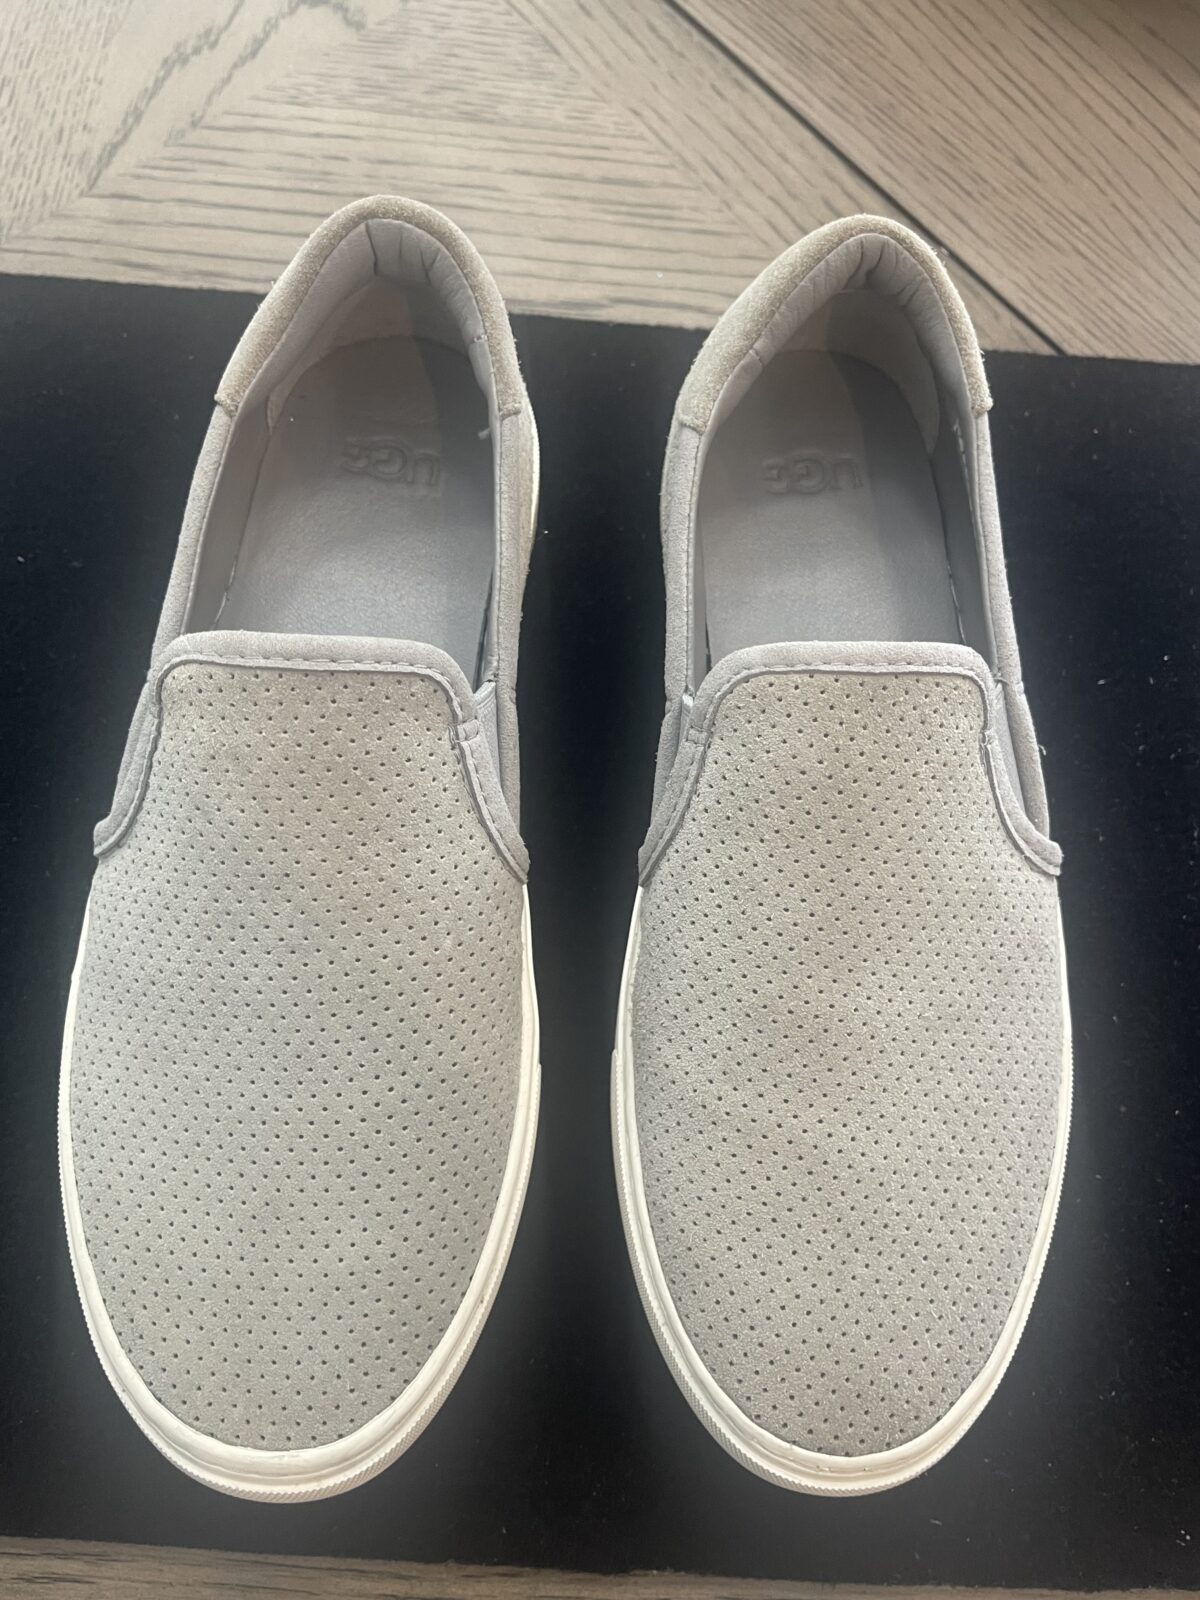 Ugg Gray Slip on shoes | Villages-News.com | Classifieds